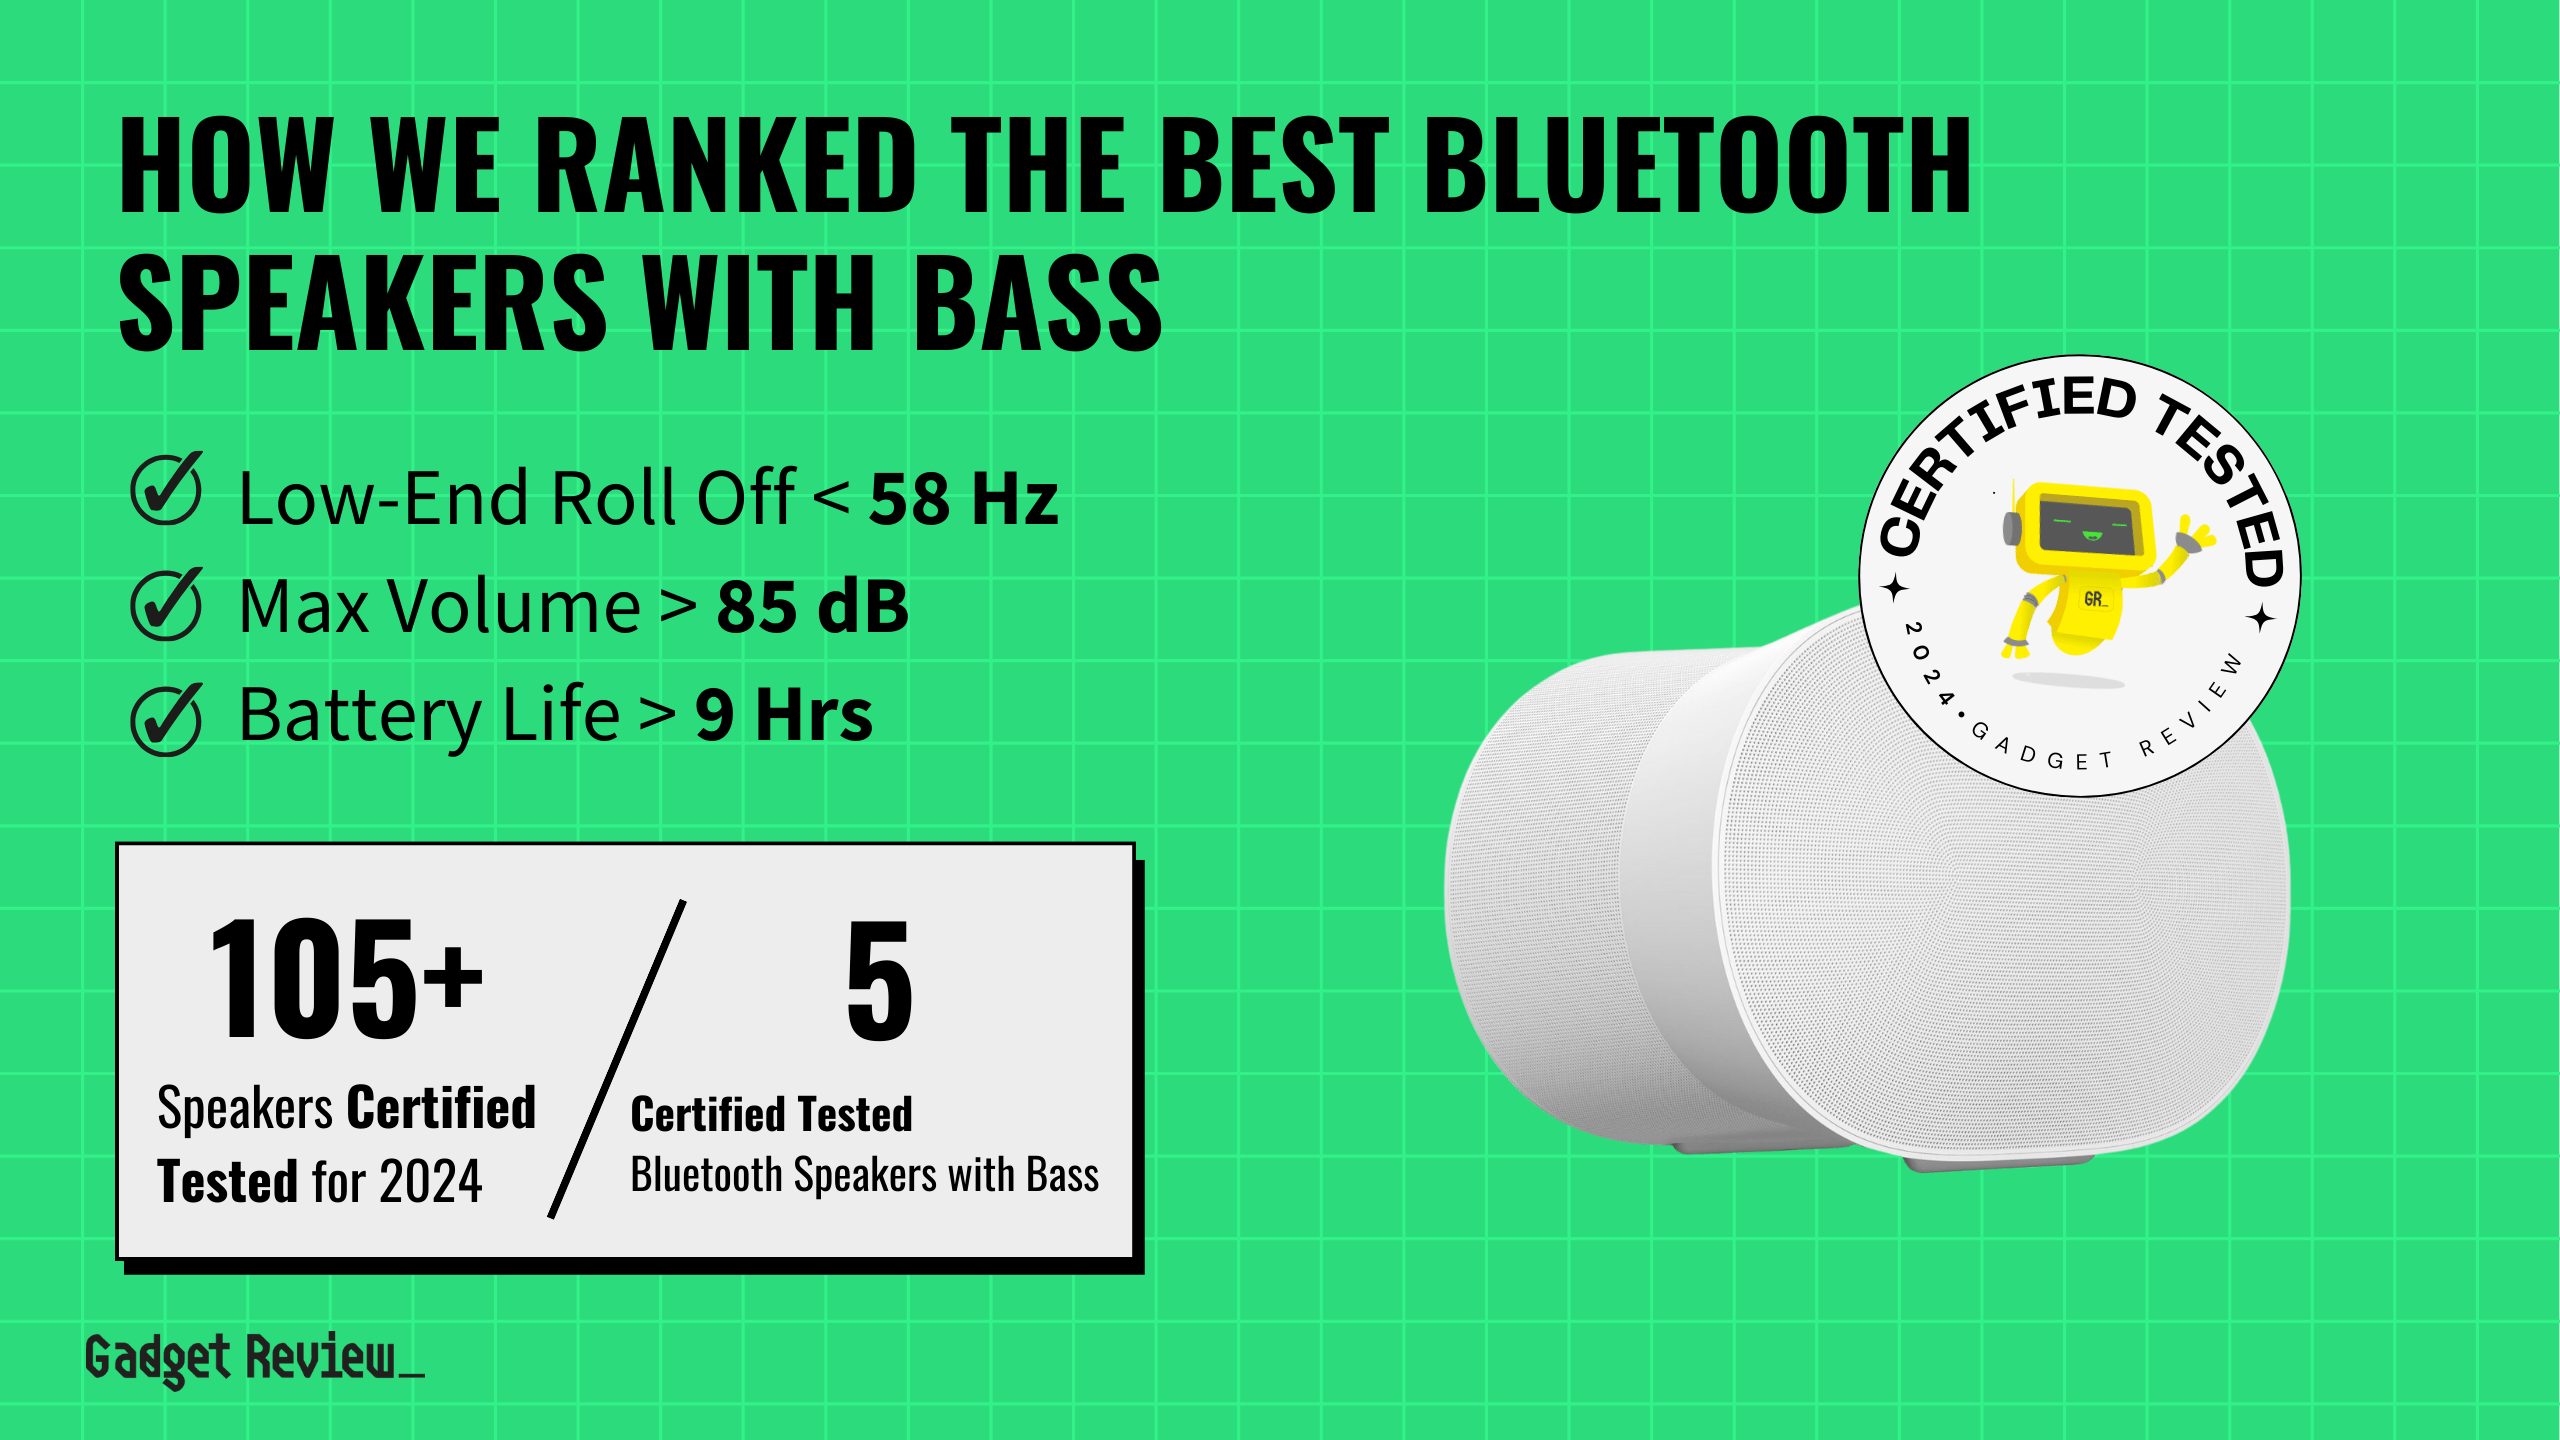 https://www.gadgetreview.com/wp-content/uploads/best-bluetooth-speaker-bass-guide-that-shows-the-top-best-bluetooth-speaker-model.png